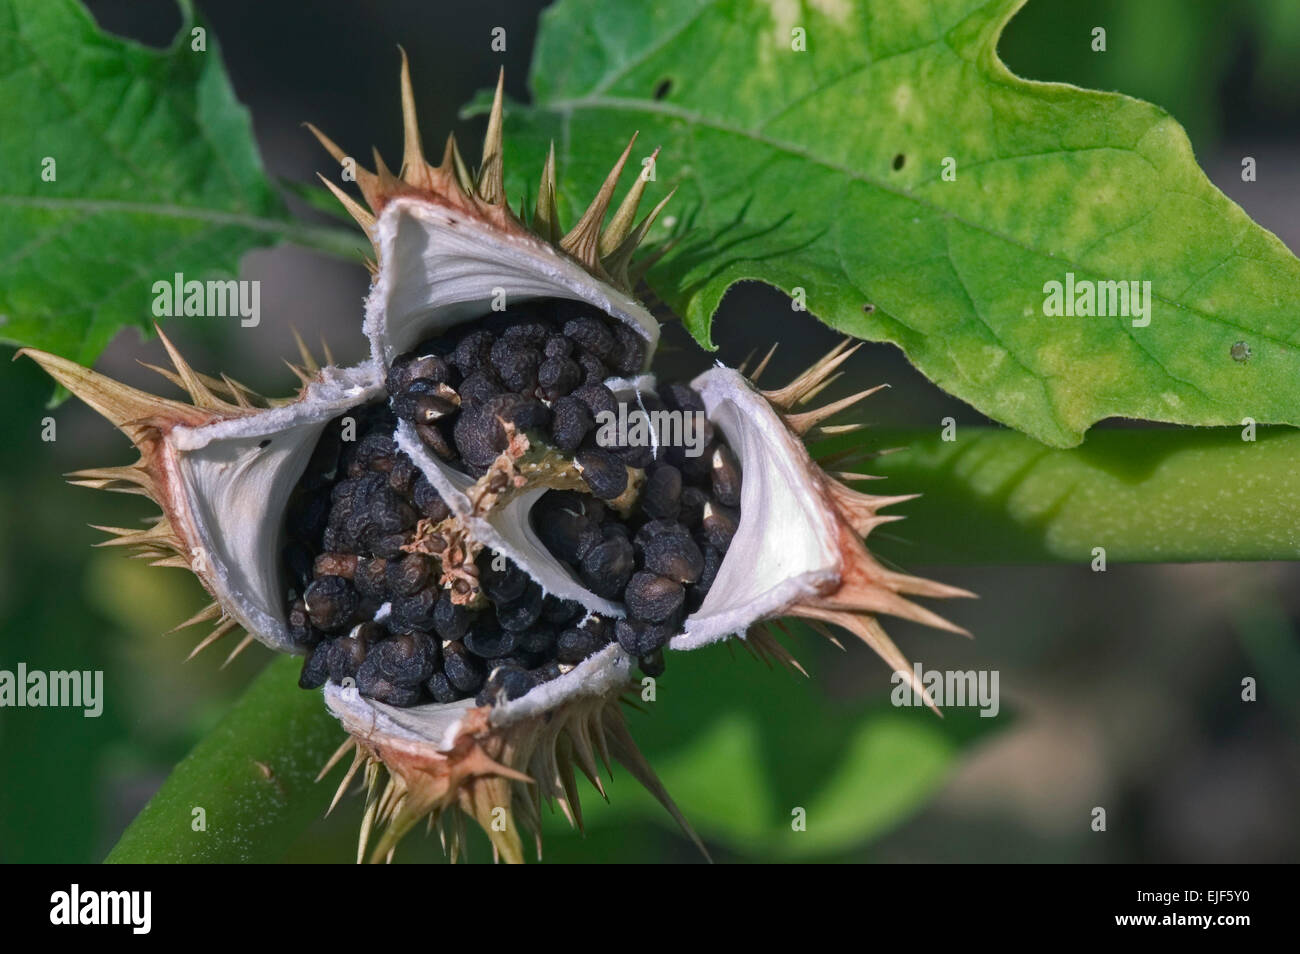 Jimson weed / Devil's snare / datura / thornapple (Datura stramonium) open seed capsule covered in spines showing black seeds Stock Photo